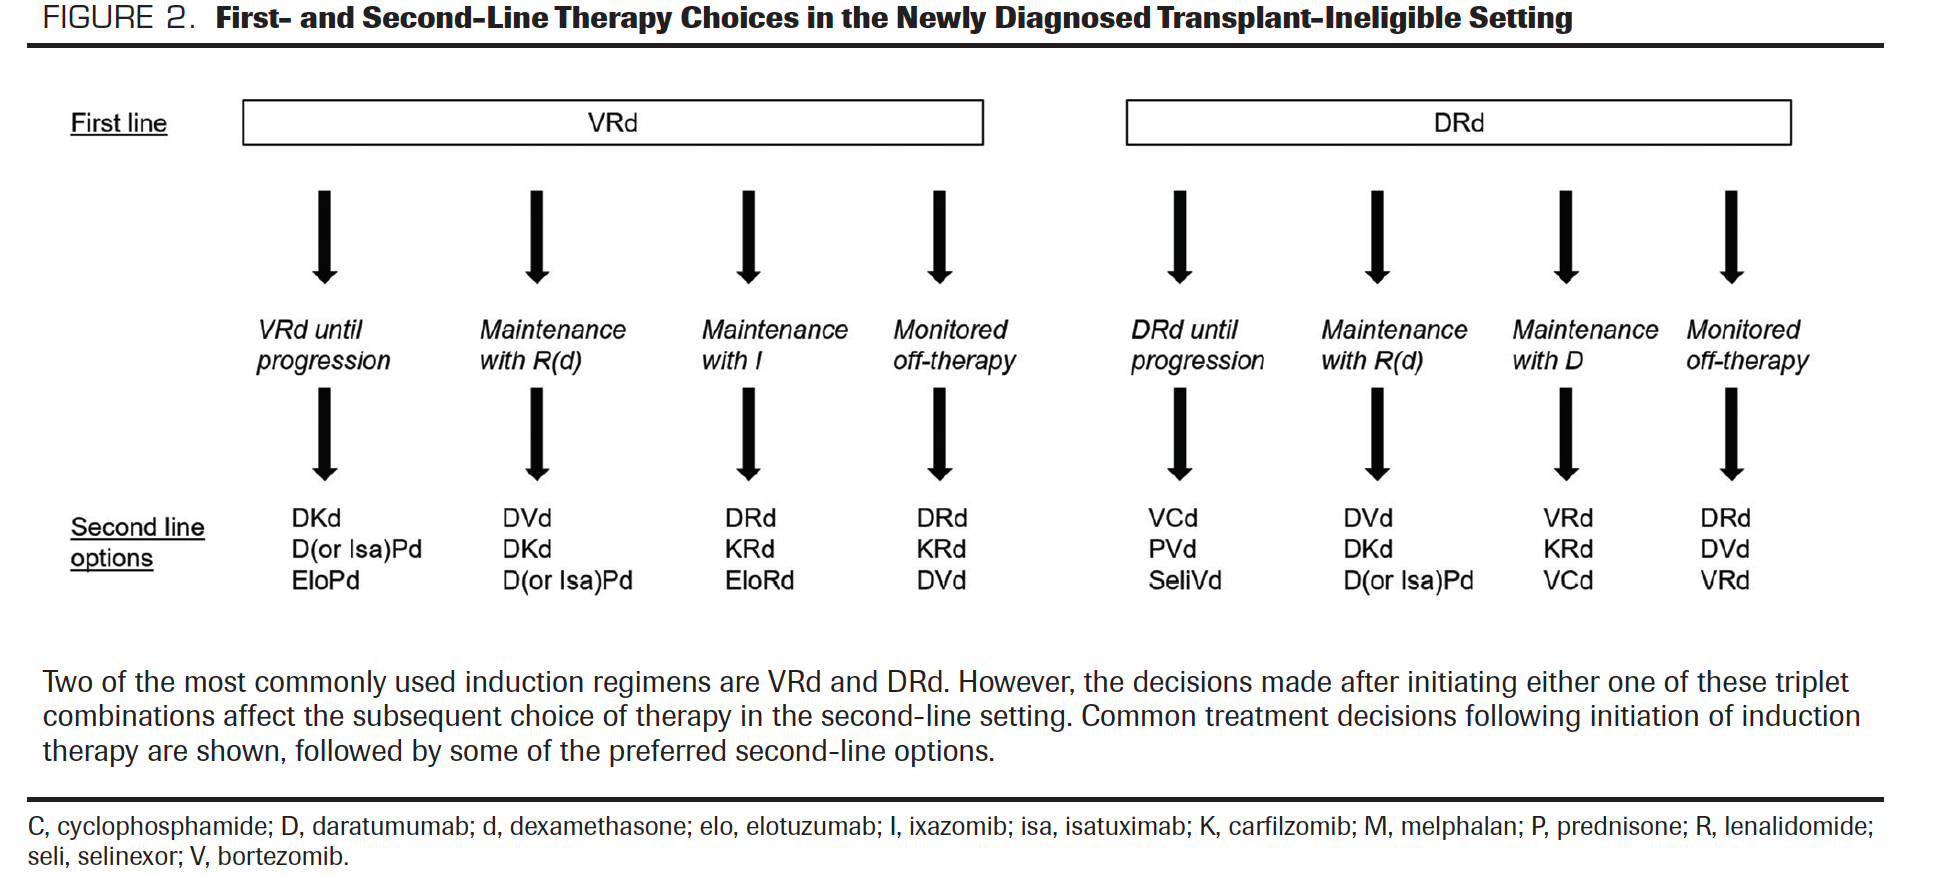 FIGURE 2. First- and Second-Line Therapy Choices in the Newly Diagnosed Transplant-Ineligible Setting